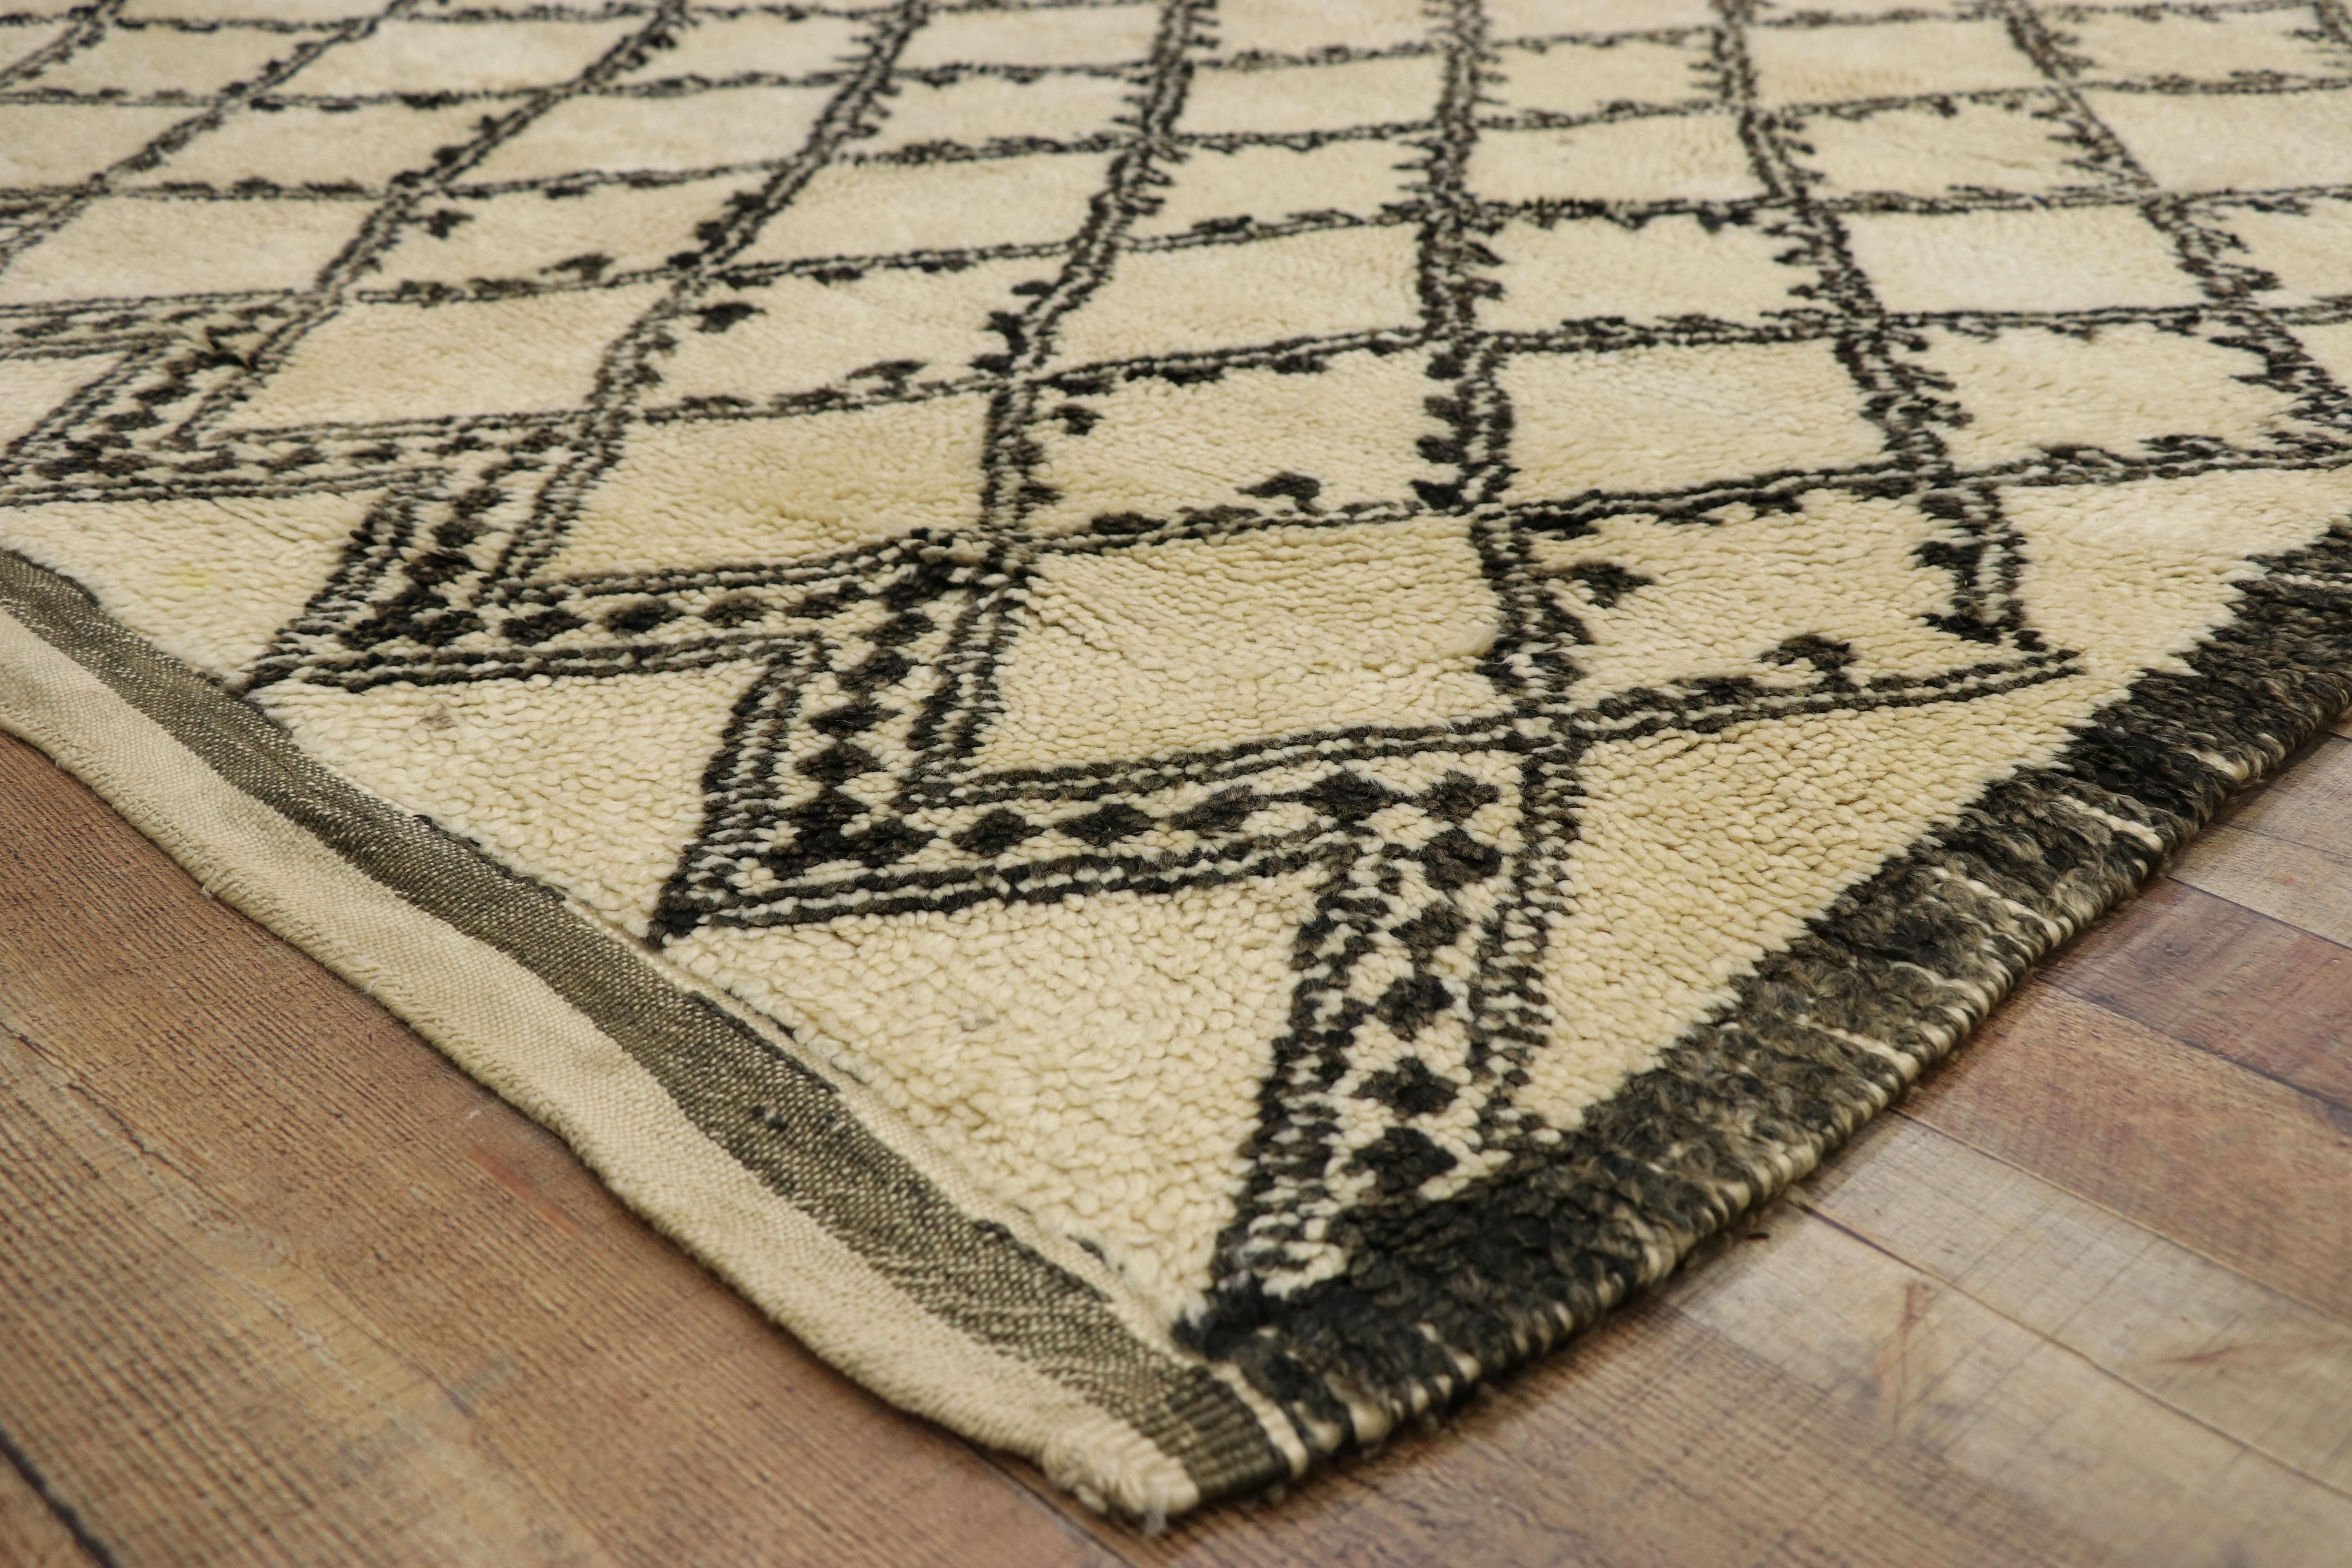 Wool Vintage Beni Ourain Rug, Berber Moroccan Rug with Mid-Century Modern Style